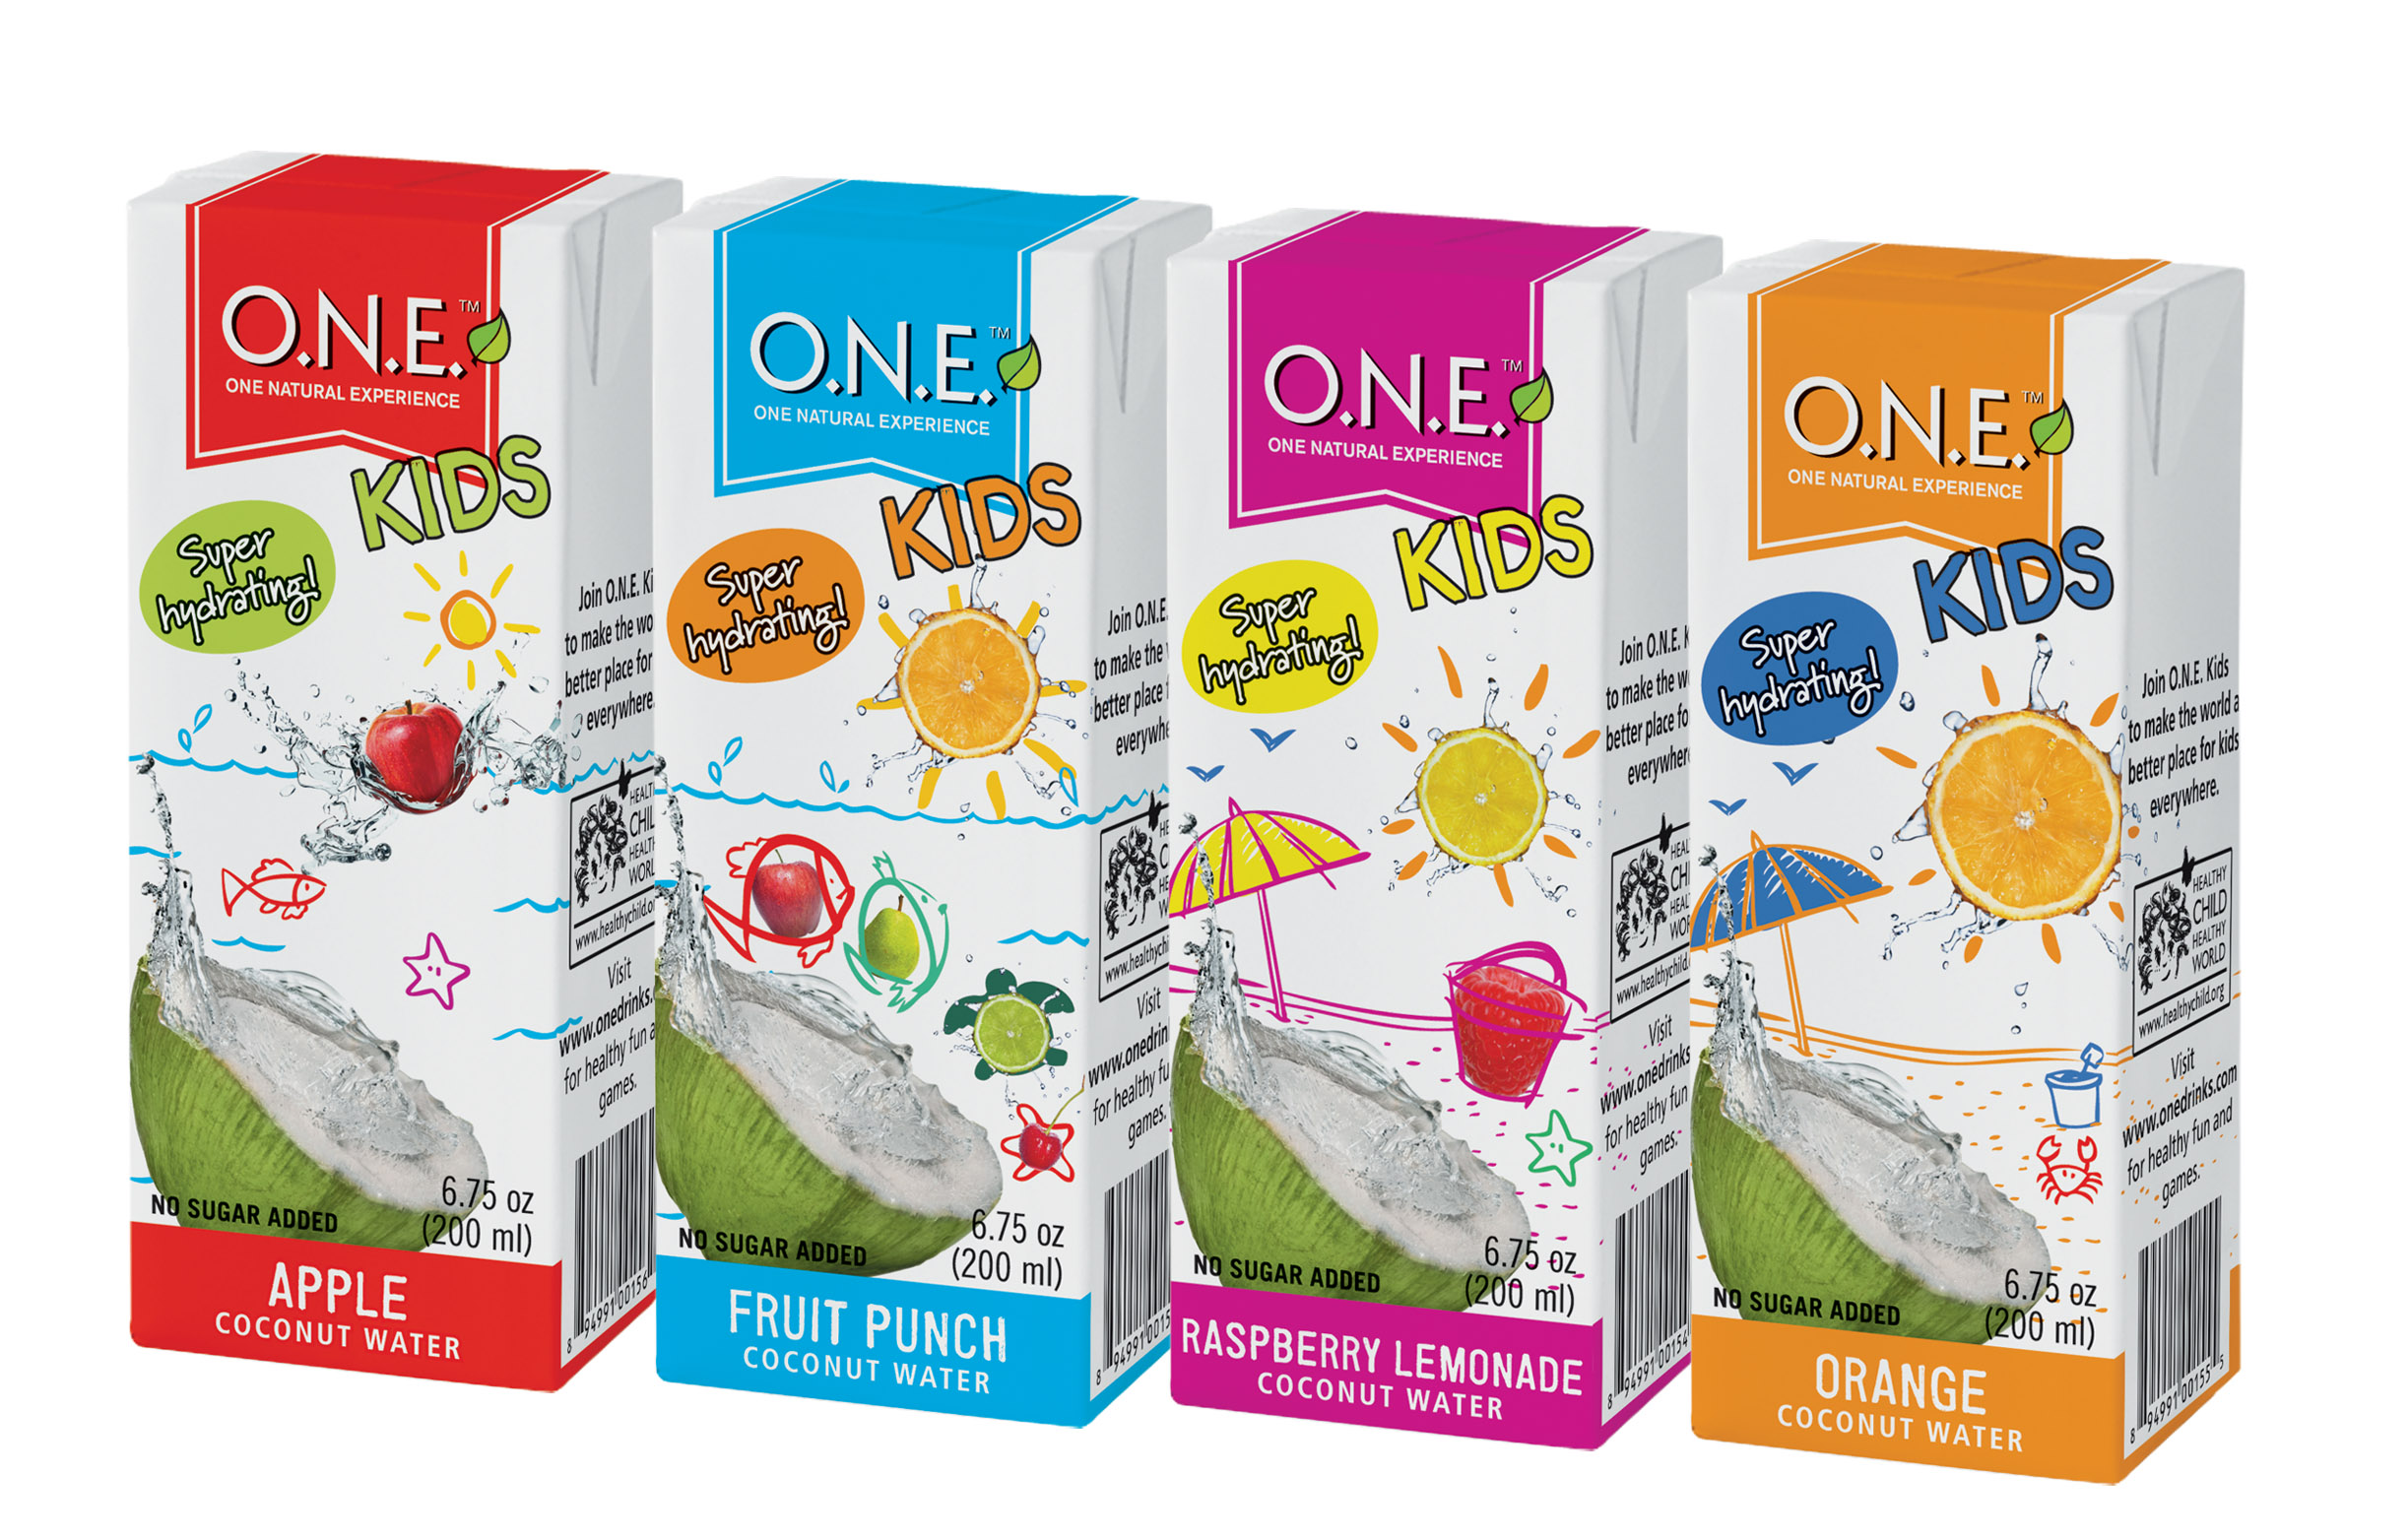 O.N.E. Kids Coconut Water with